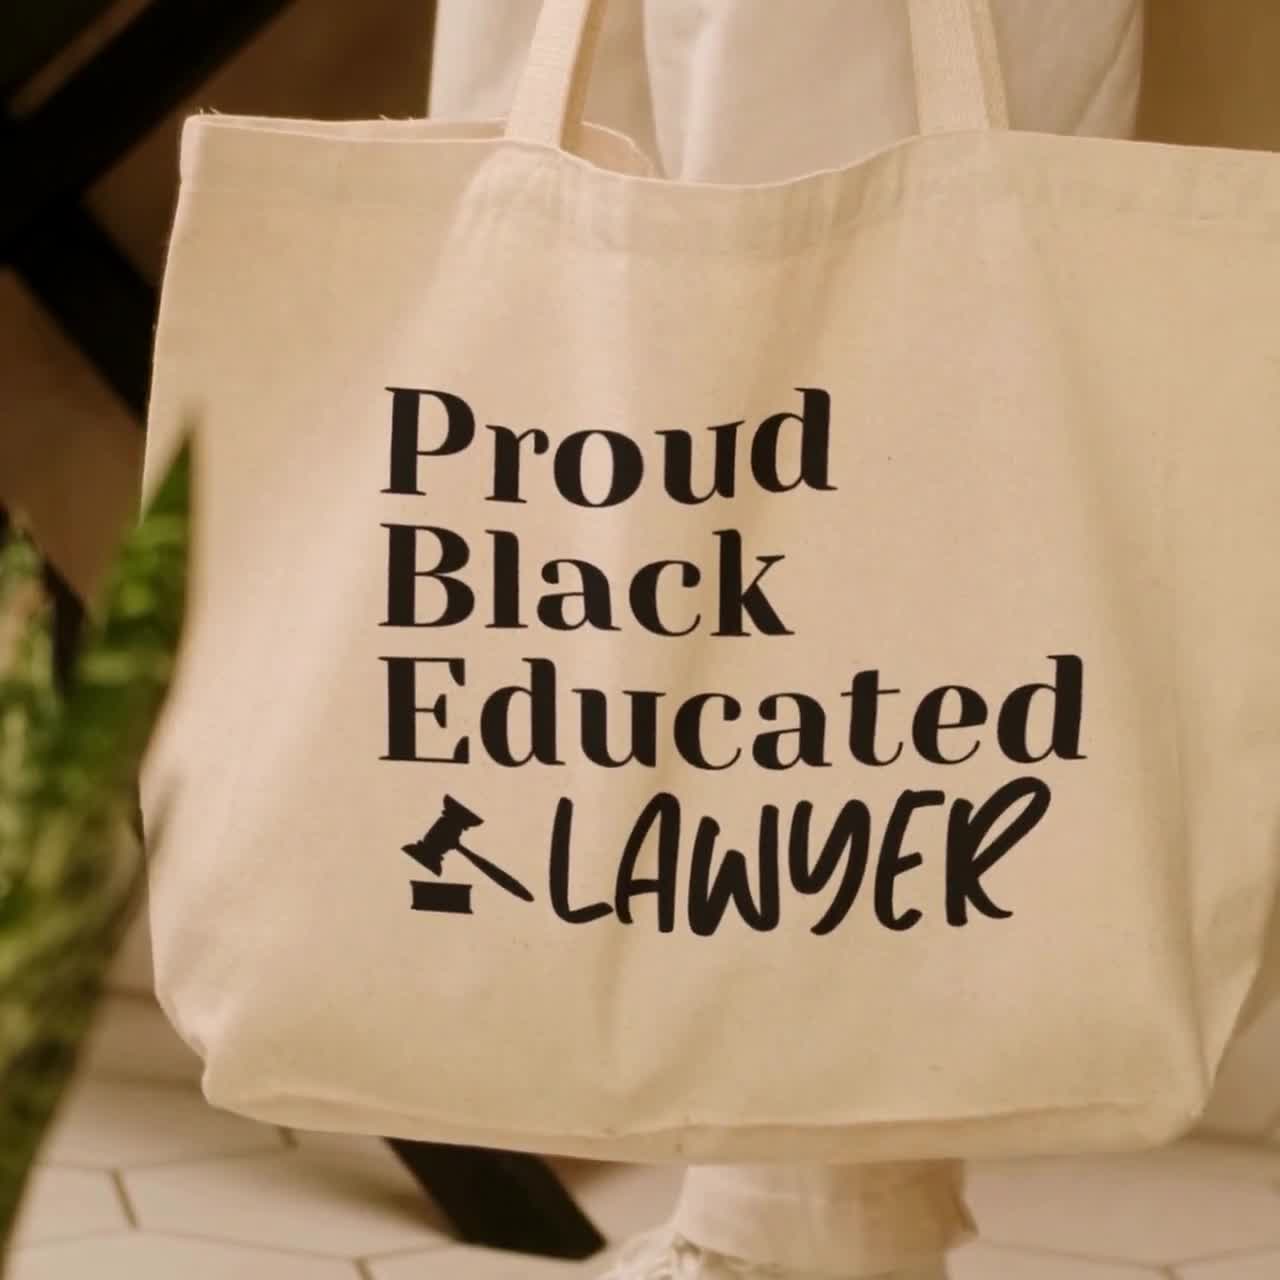 Designer Bags and Lawyers